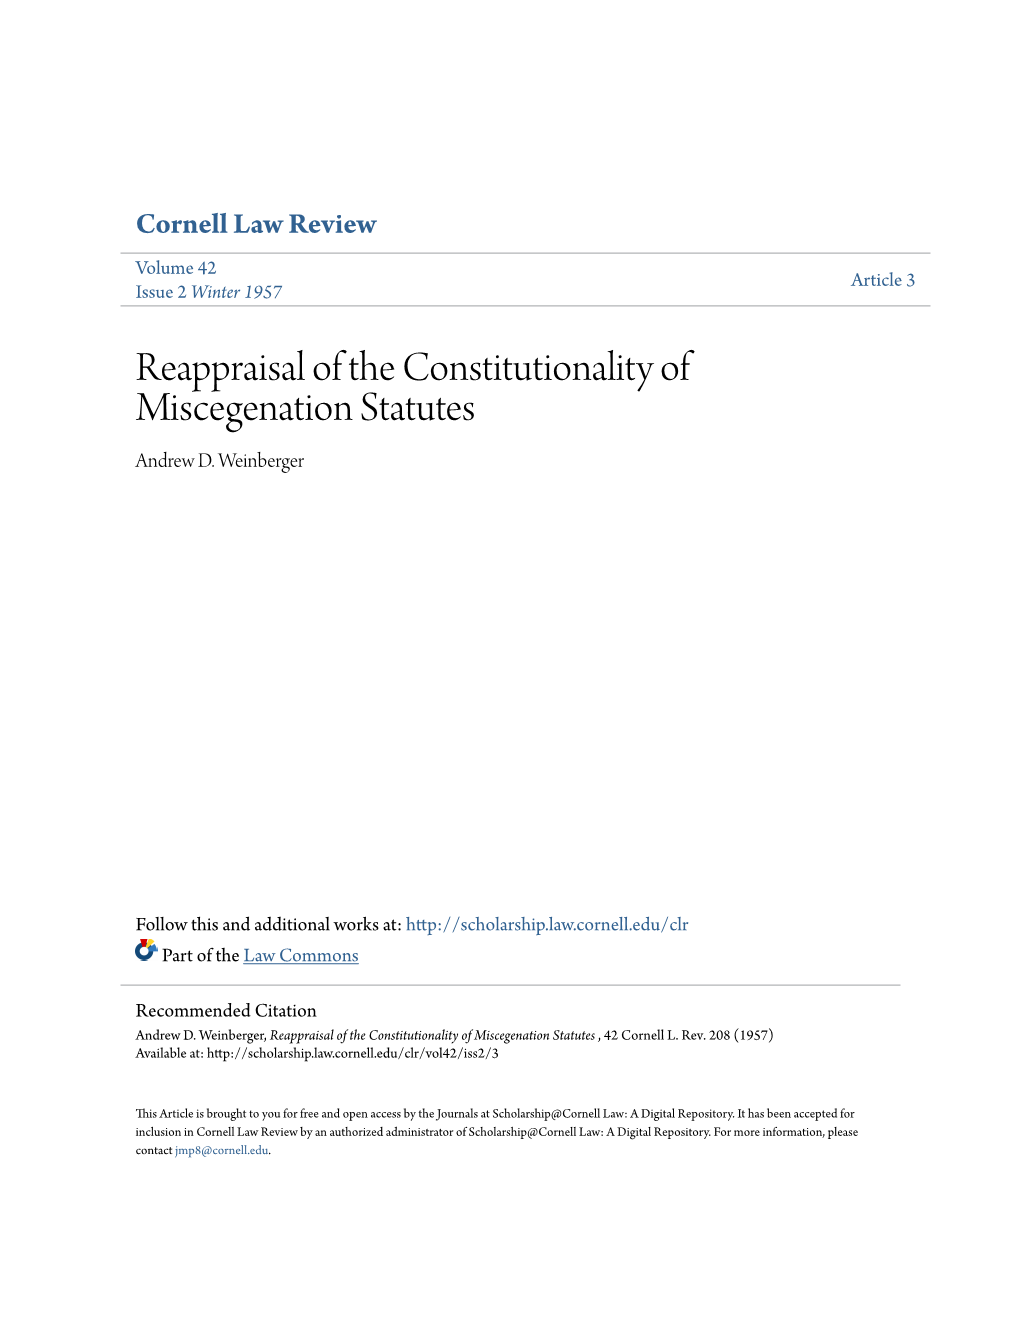 Reappraisal of the Constitutionality of Miscegenation Statutes Andrew D